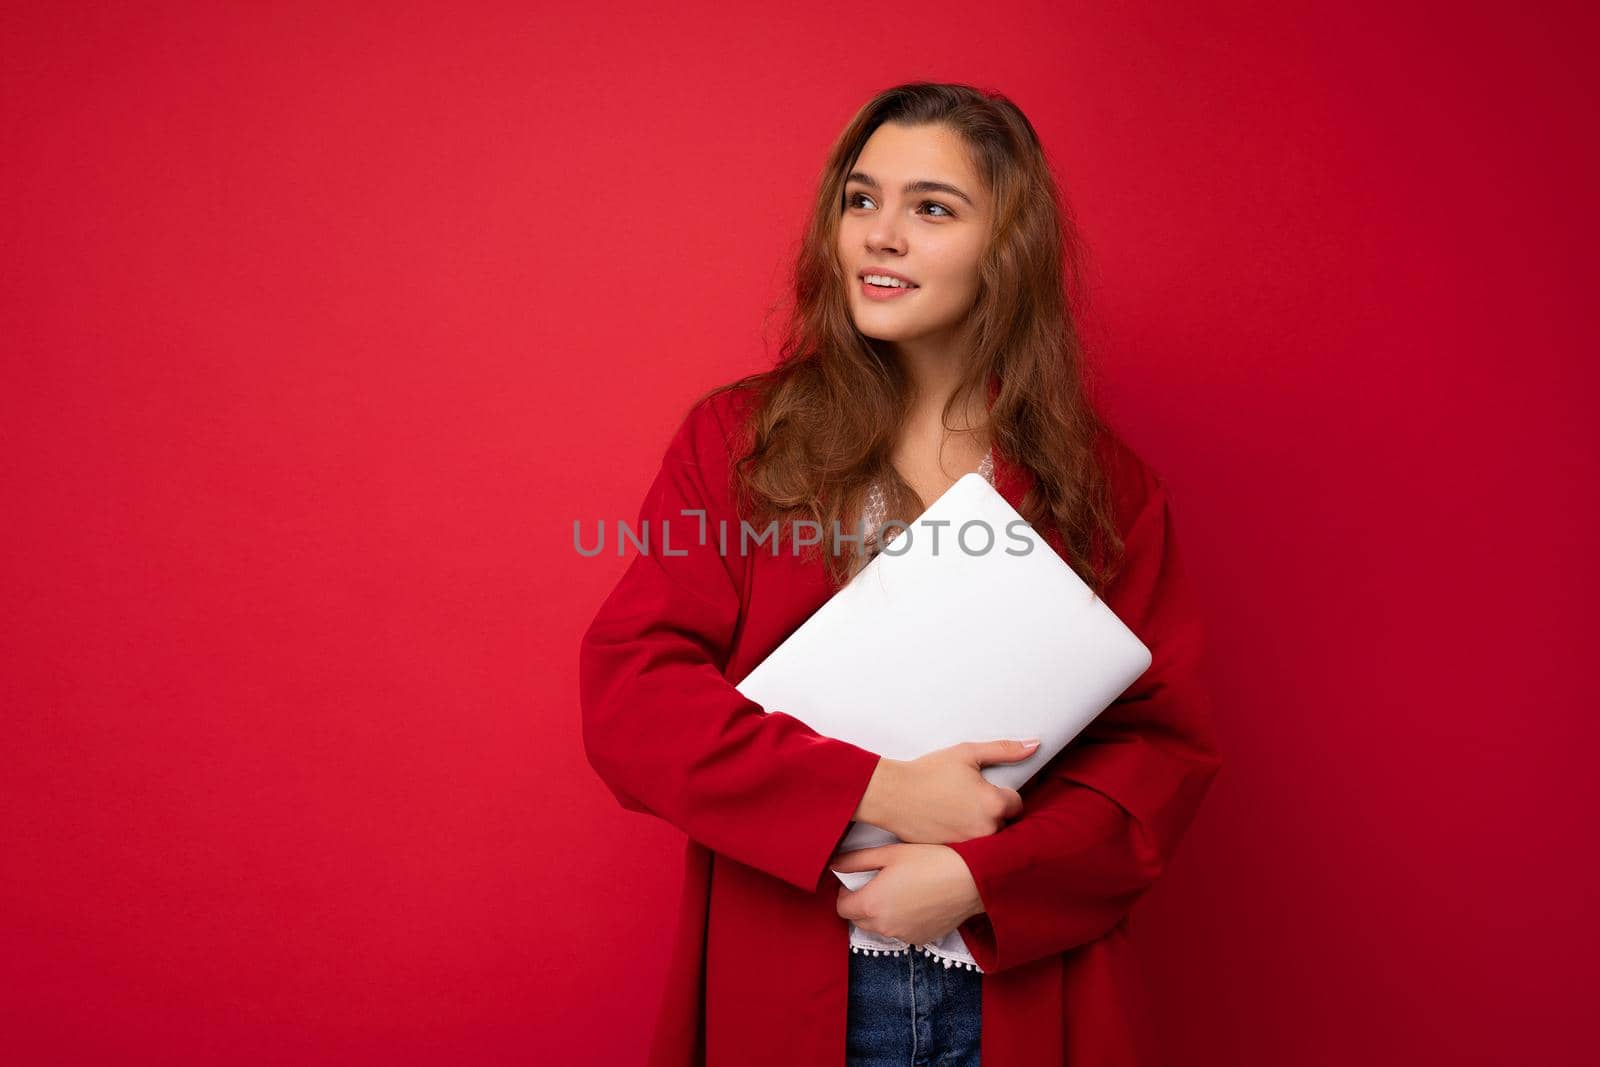 Charming mysterious young curly lady holding netbook wearing red cardigan and white blouse looking to the side isolated over red background. Copy space